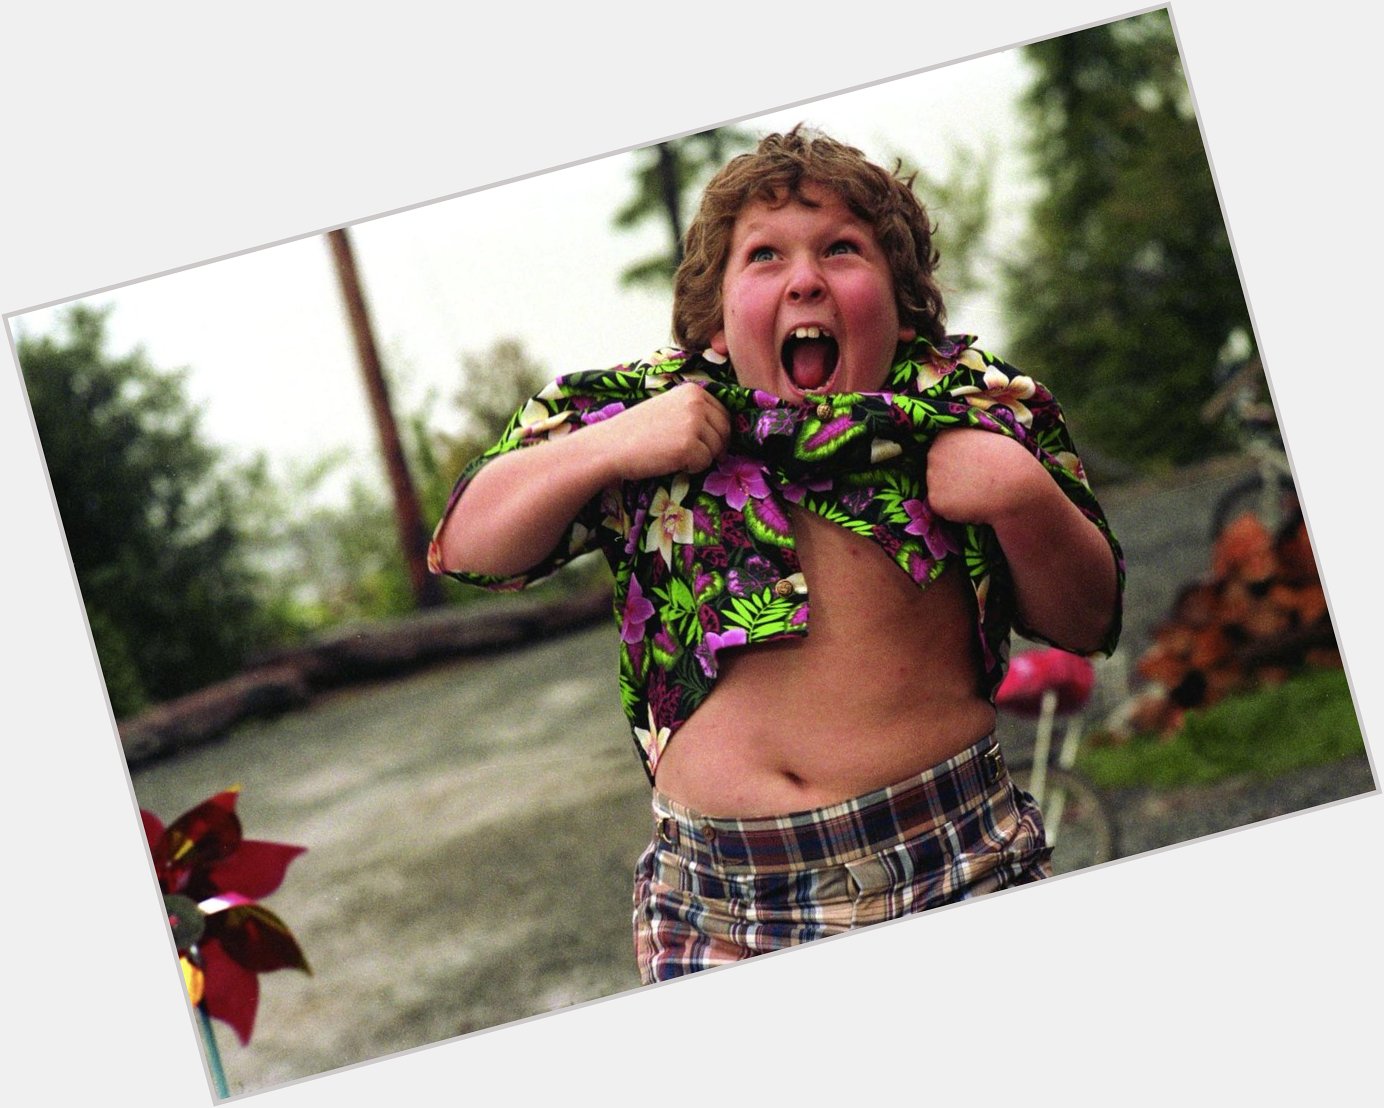 Happy Birthday to Jeff Cohen who turns 41 today. We will all remember him as Chunk from the Goonies! 